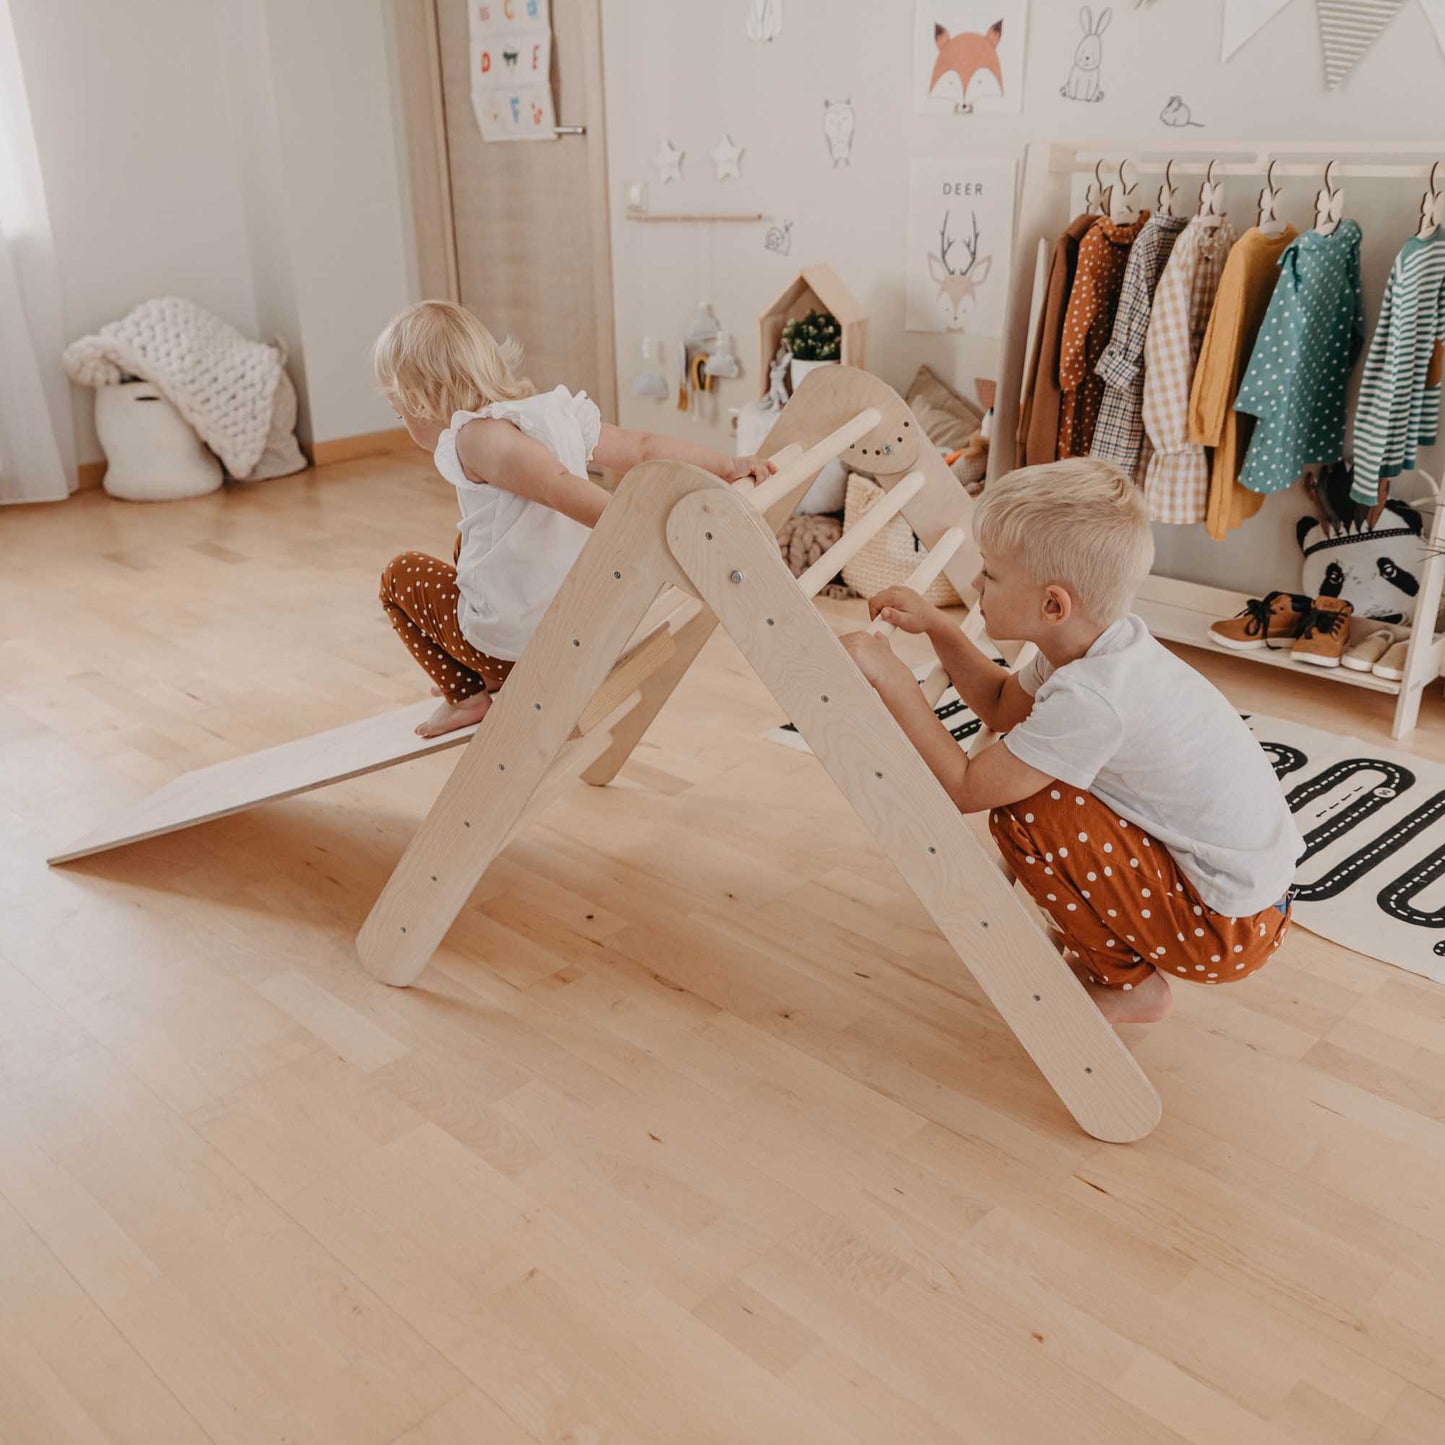 Two children using the Foldable climbing triangle with 2 slope levels to play with a wooden toy and develop their motor skills in a room.